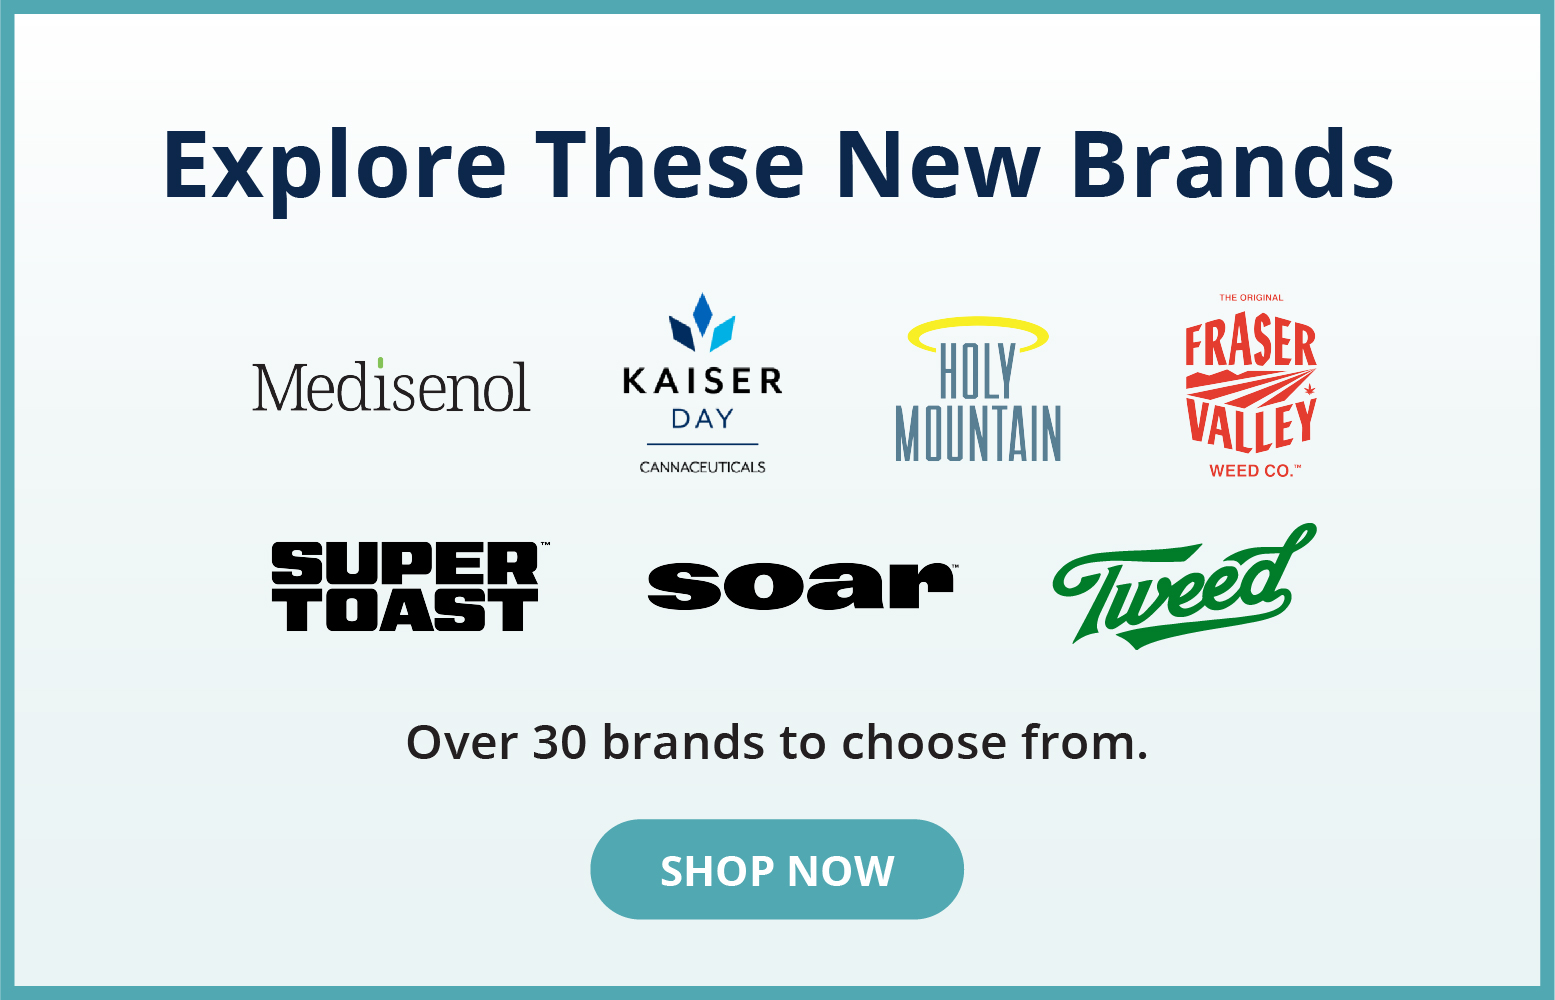 Explore These New Brands. Shop Now!